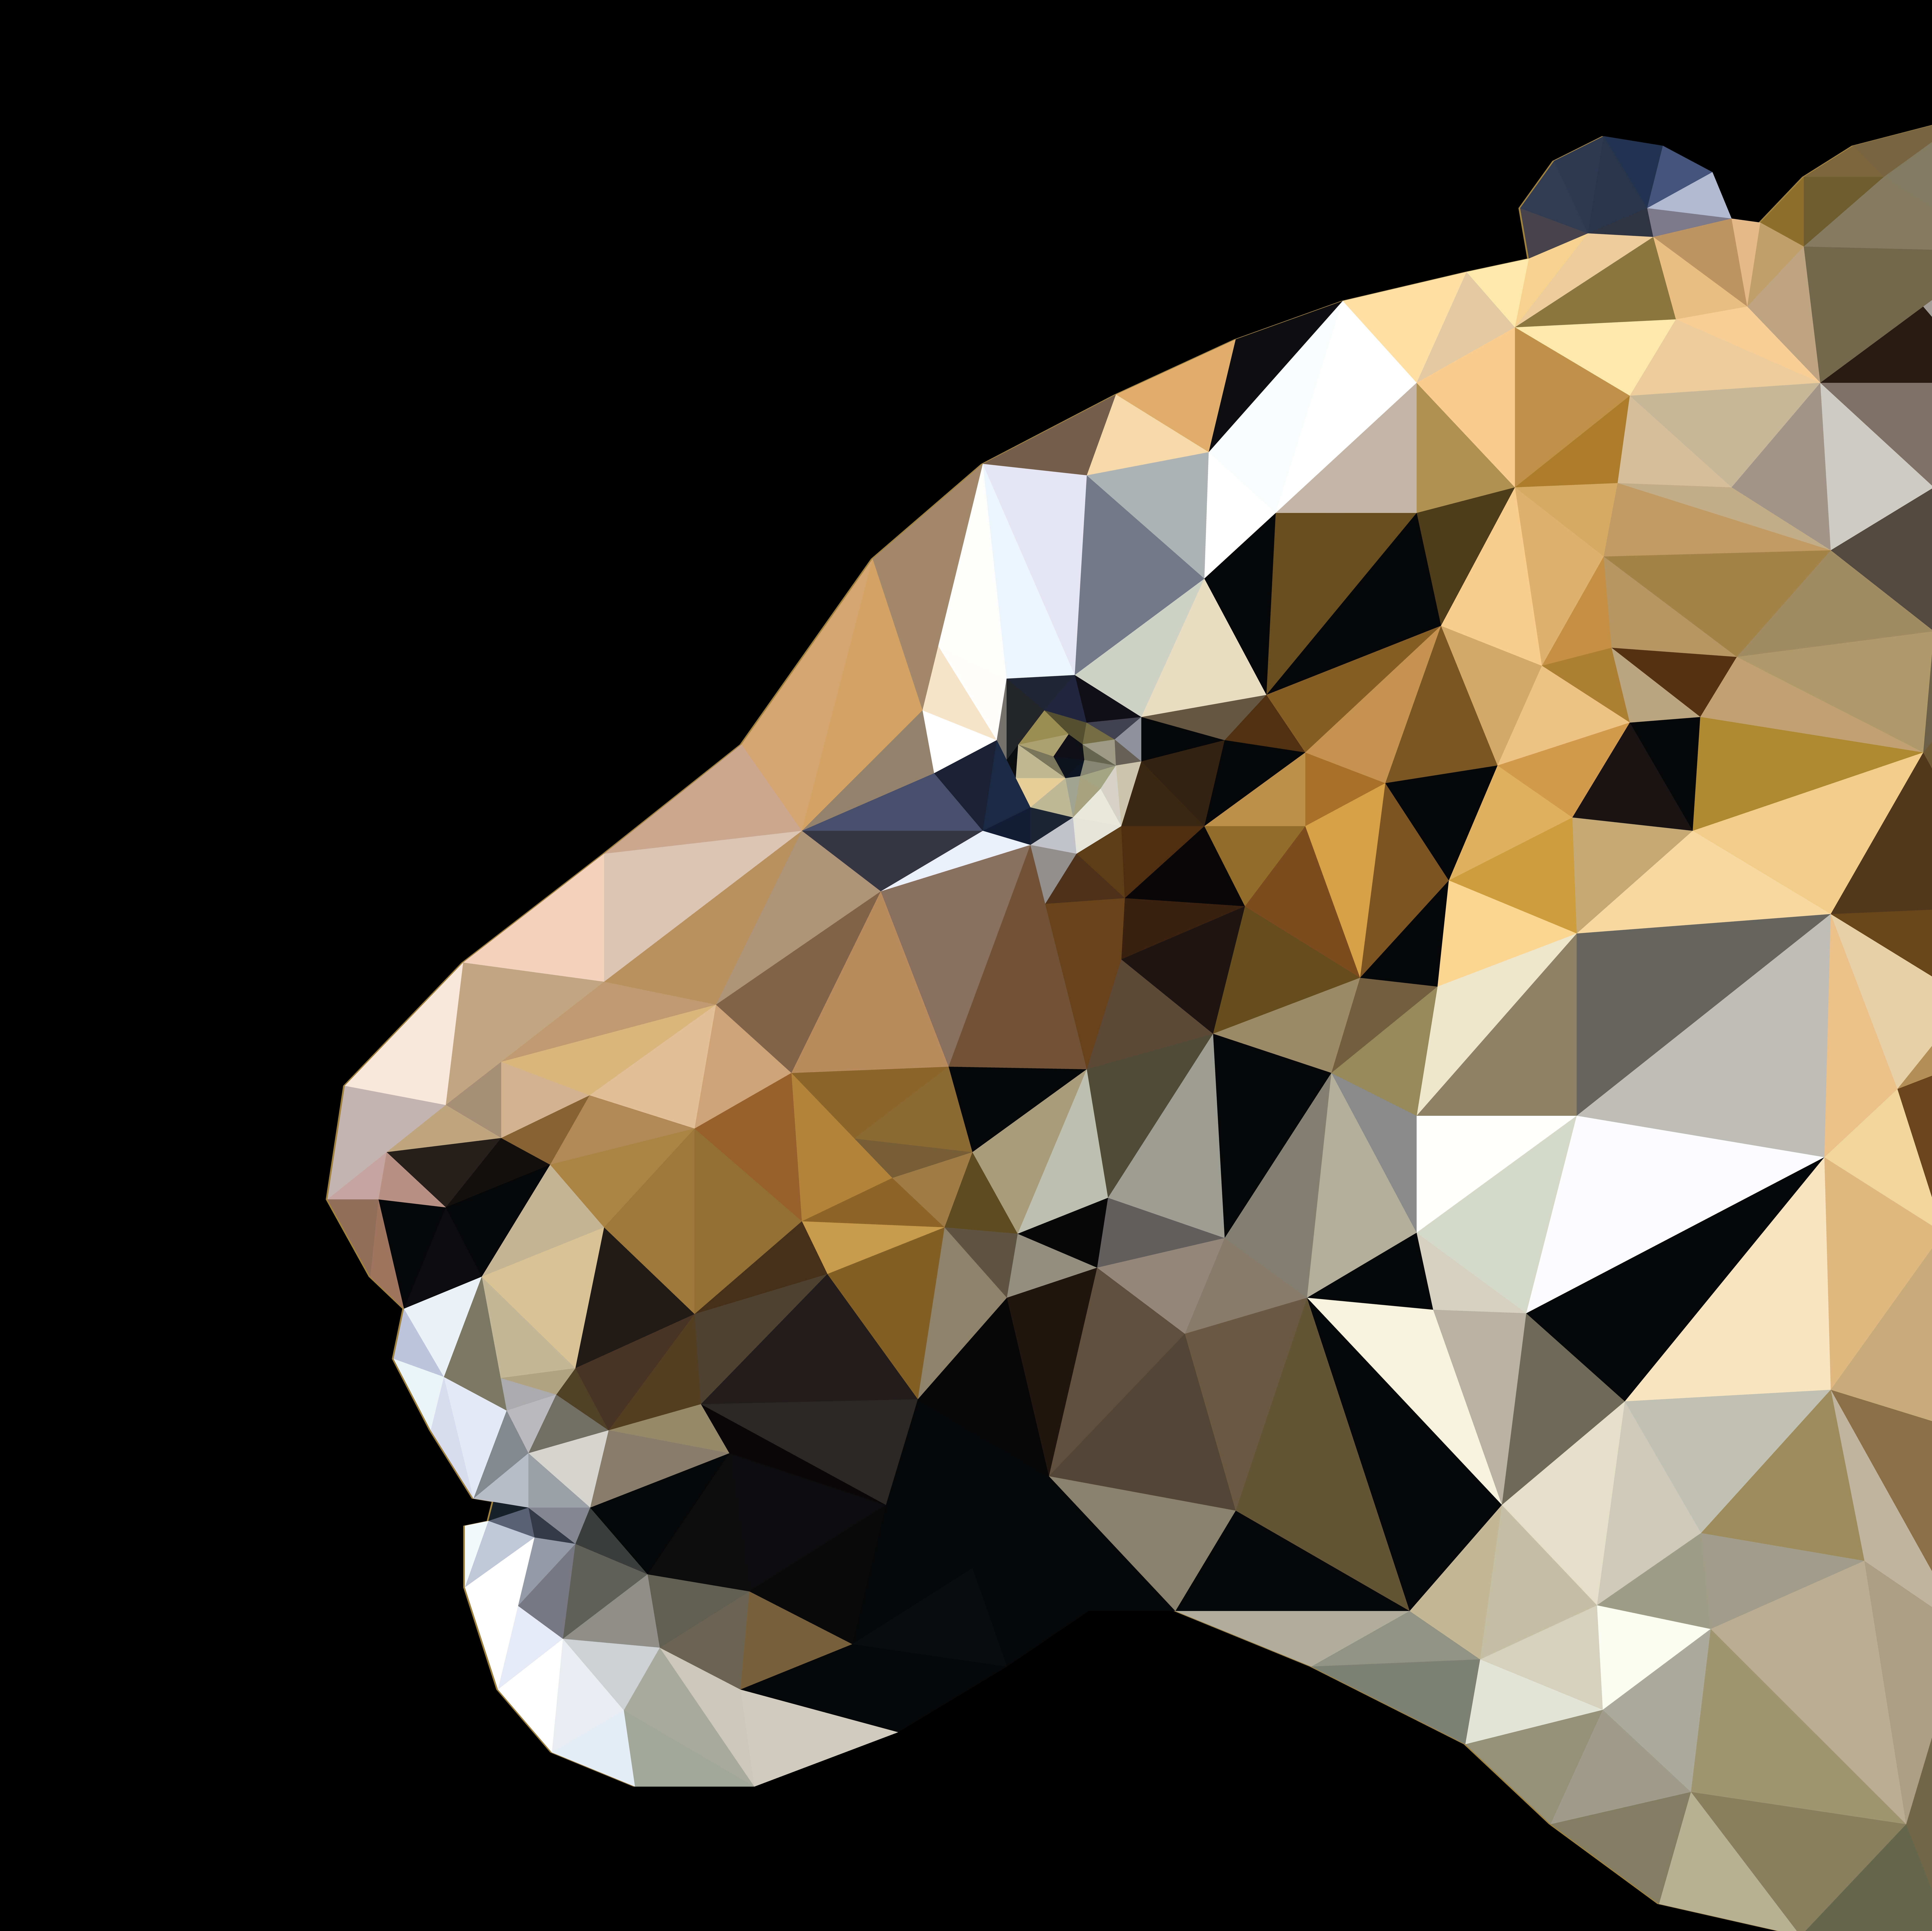 tiger, Low poly, Illustration, Triangle Wallpaper